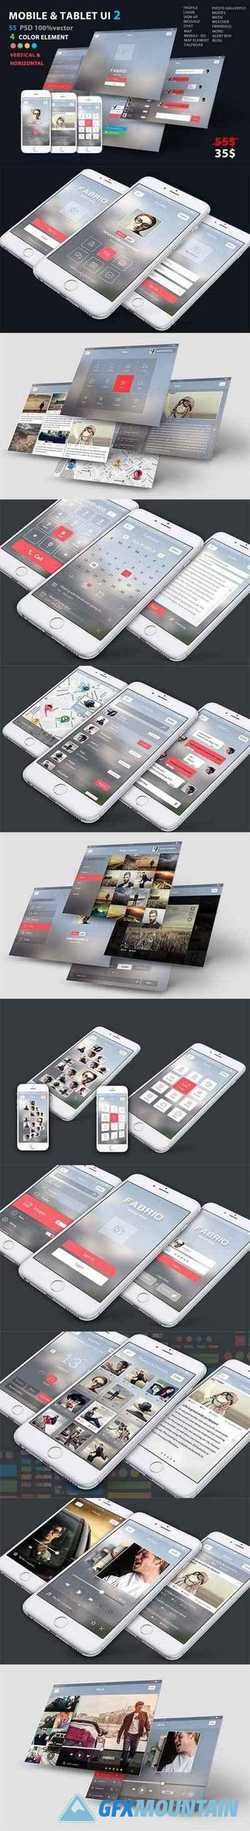 Mobile and Tablet UX UI kit 2 - CM 1966000